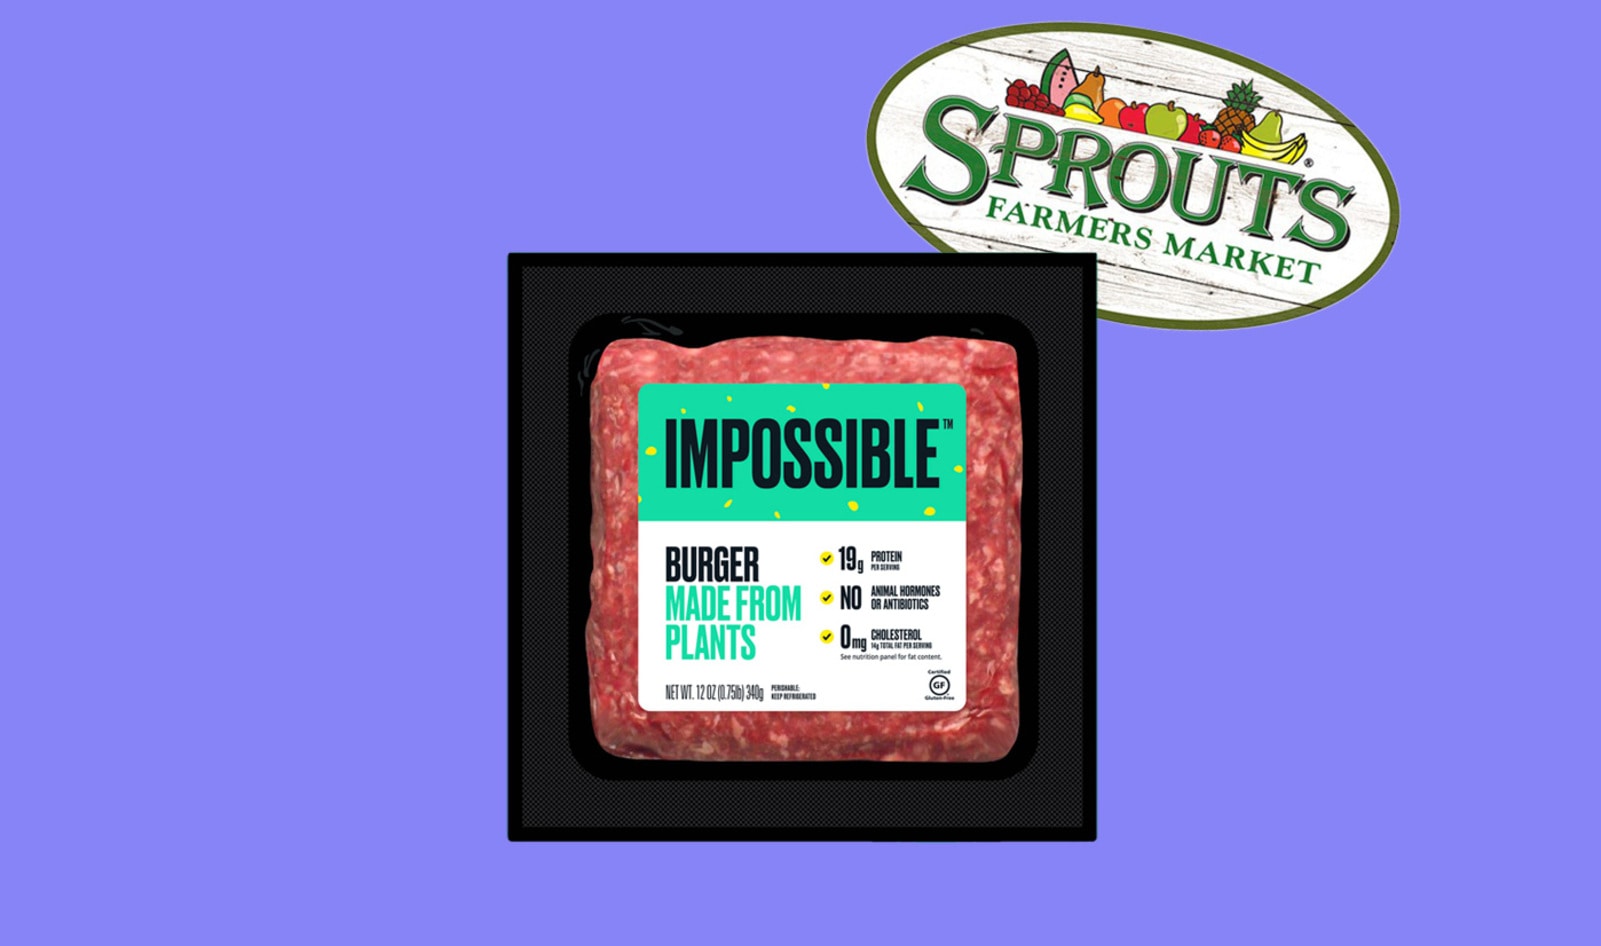 Impossible Burger Launches at Sprouts Markets Across 23 States